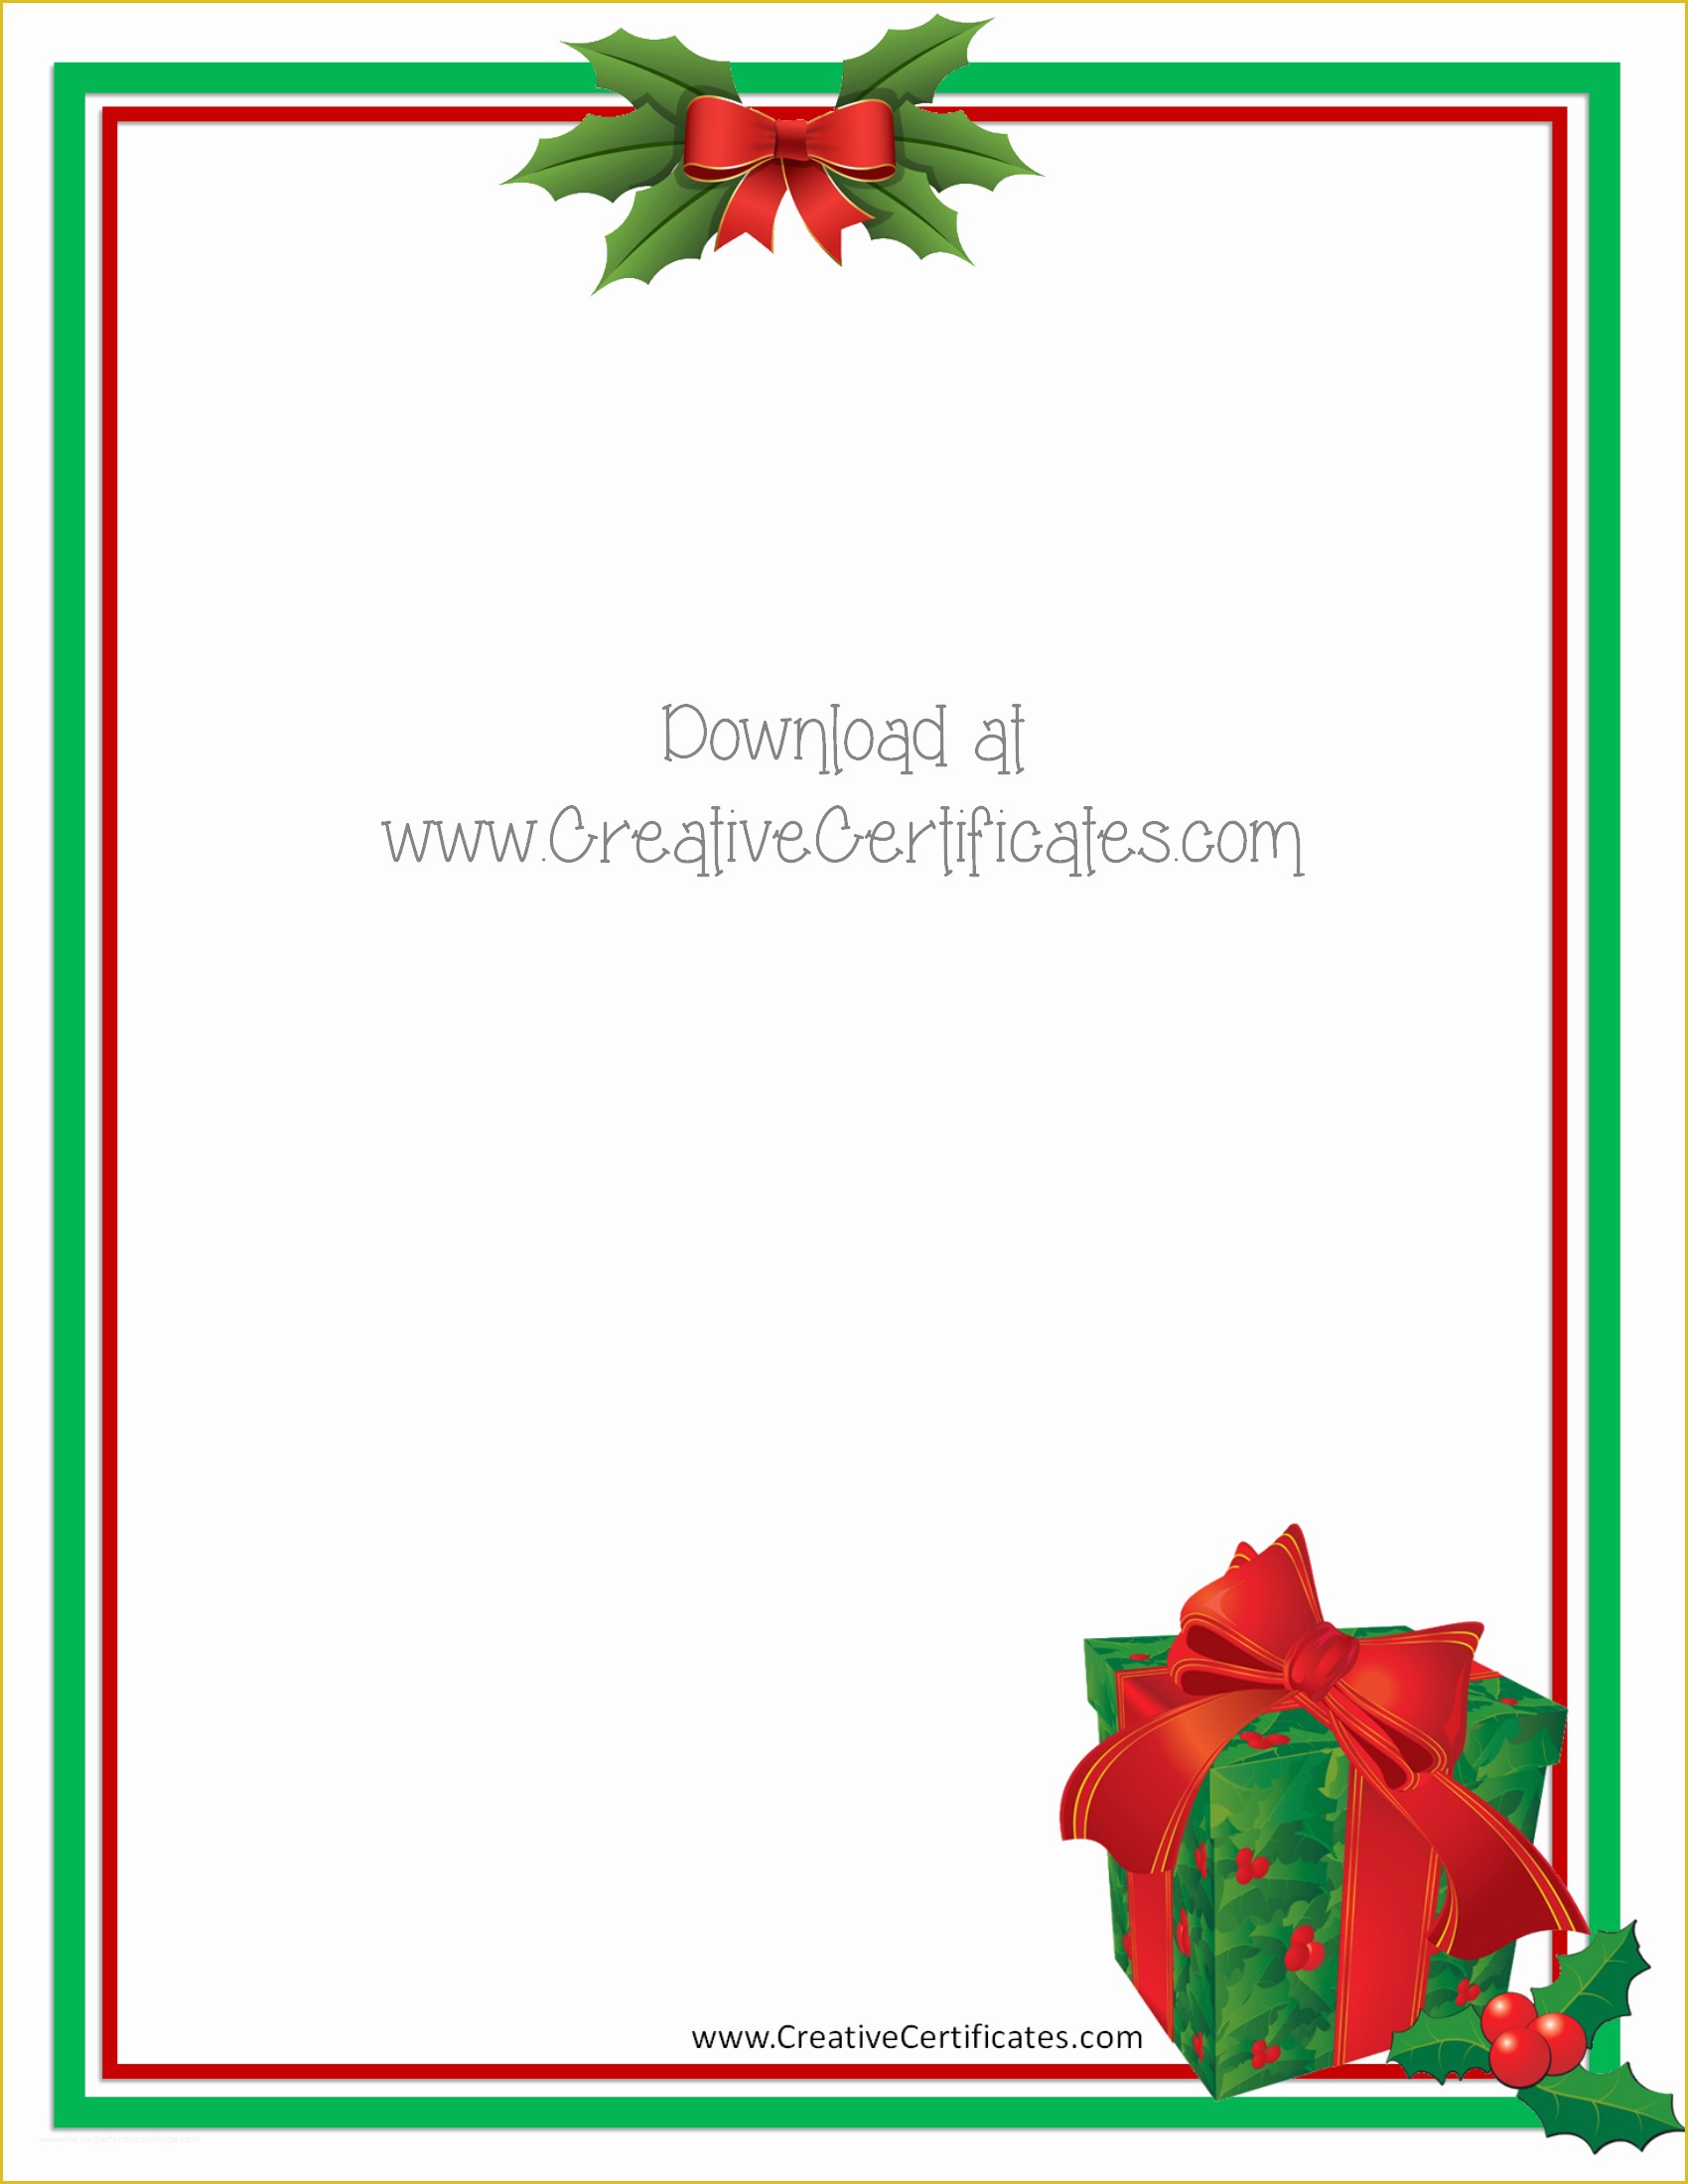 Word Document Templates Free Of Christmas Word Document Template Portablegasgrillweber